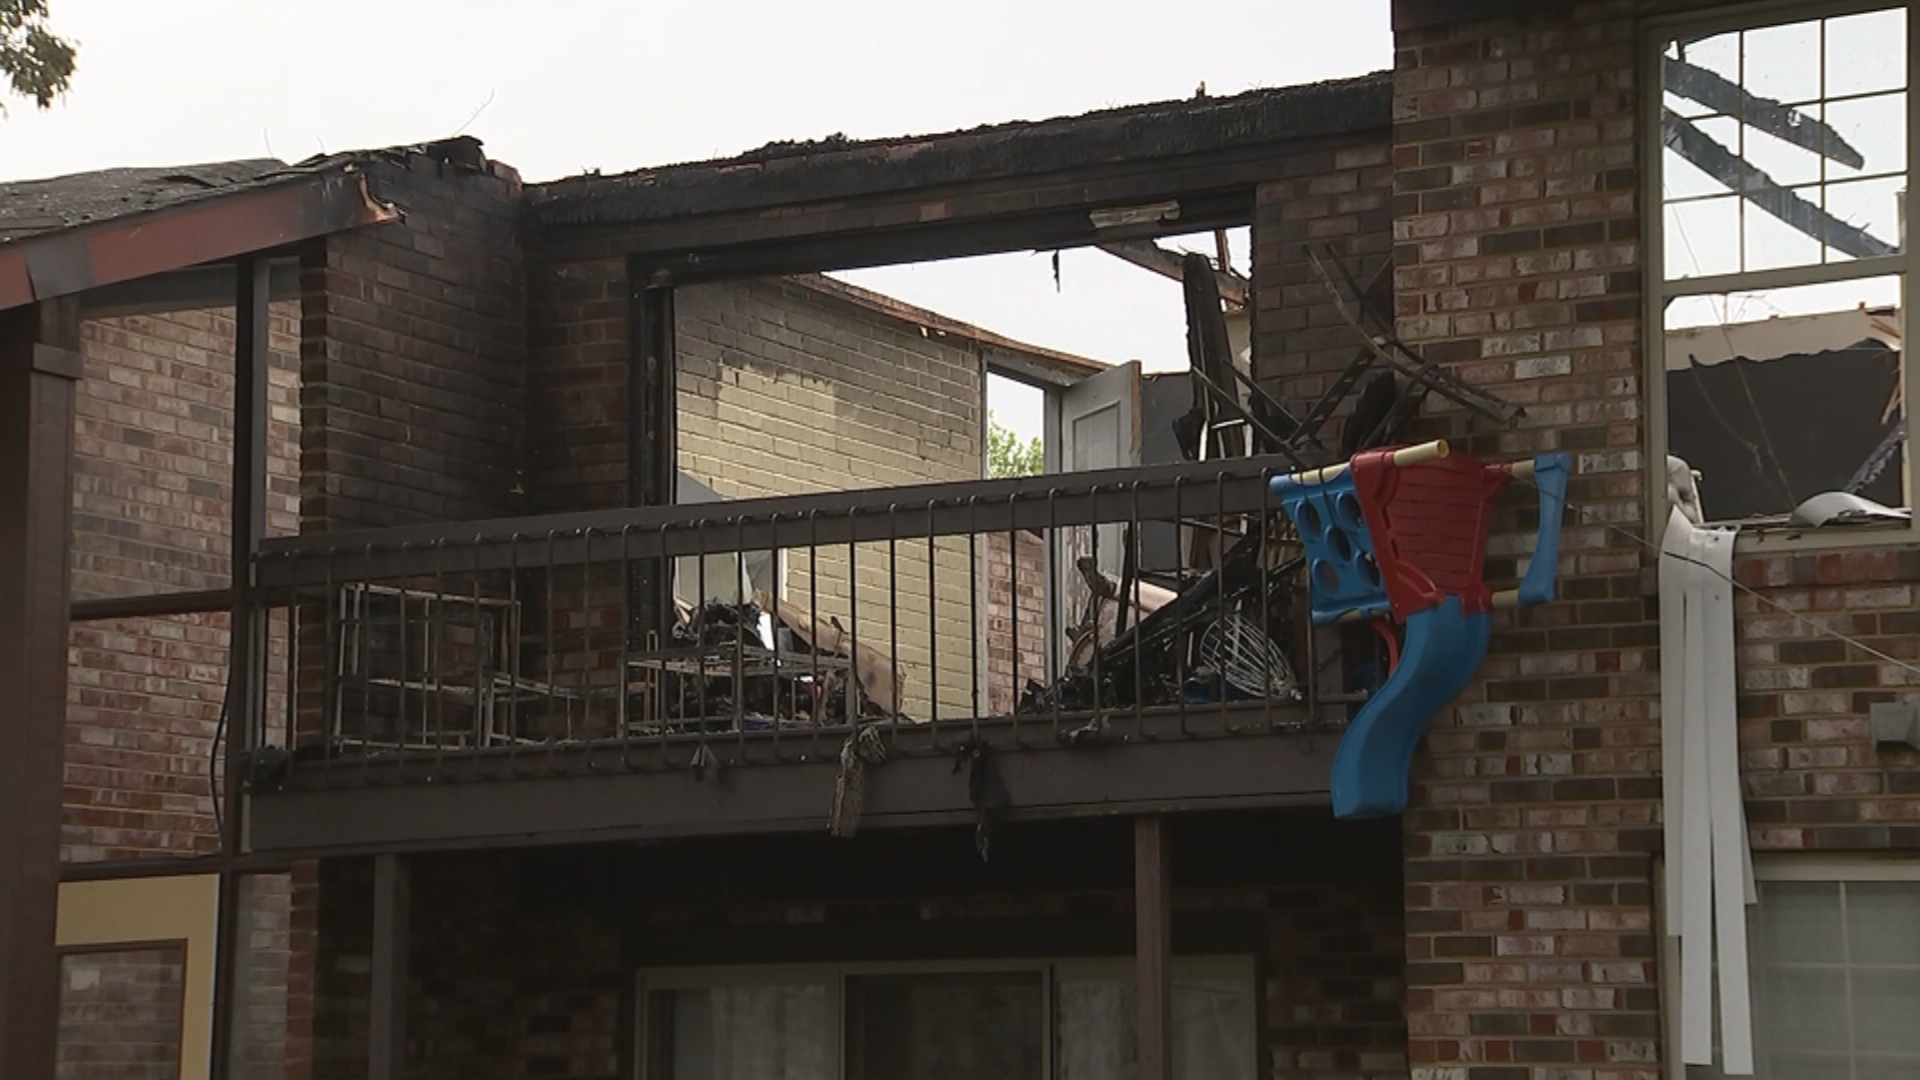 Neighbors Demand Answers After Fire At Myrtle Place Apartments In Camden Leaves 9 Families Displaced